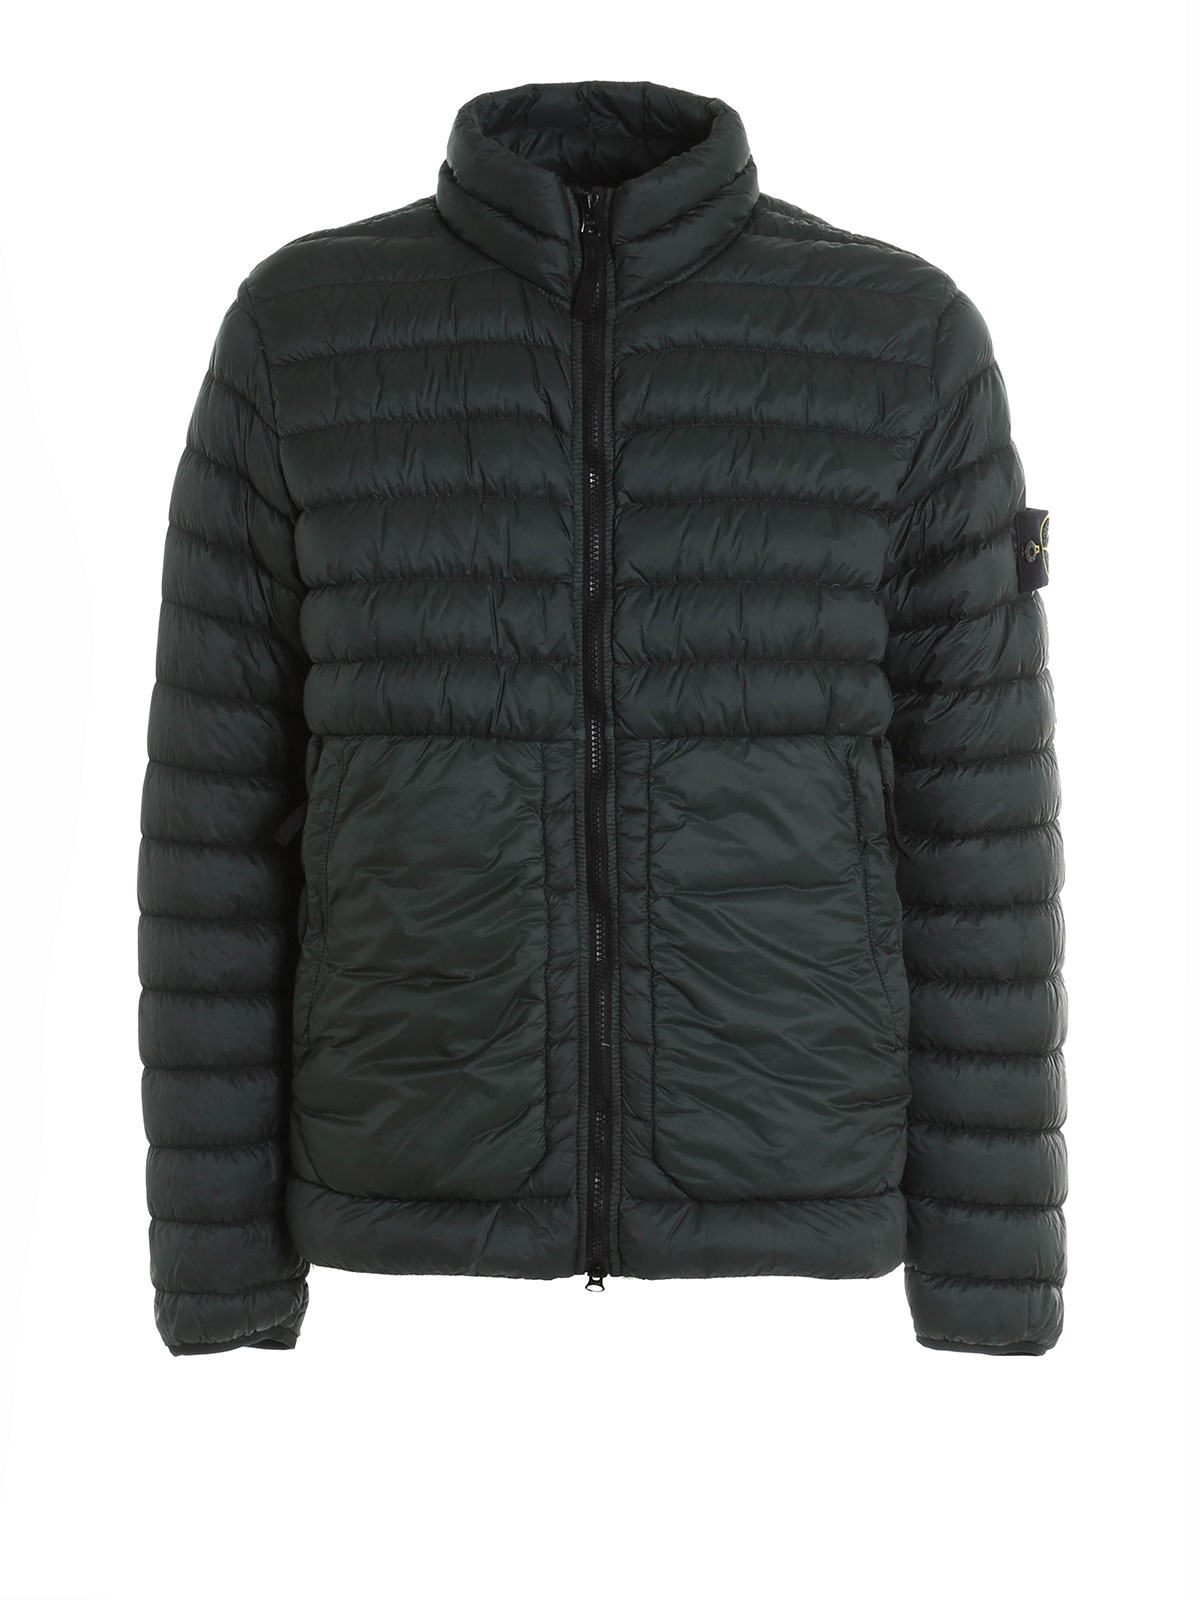 Stone Island - Packable down jacket - padded jackets - 651540724V0057